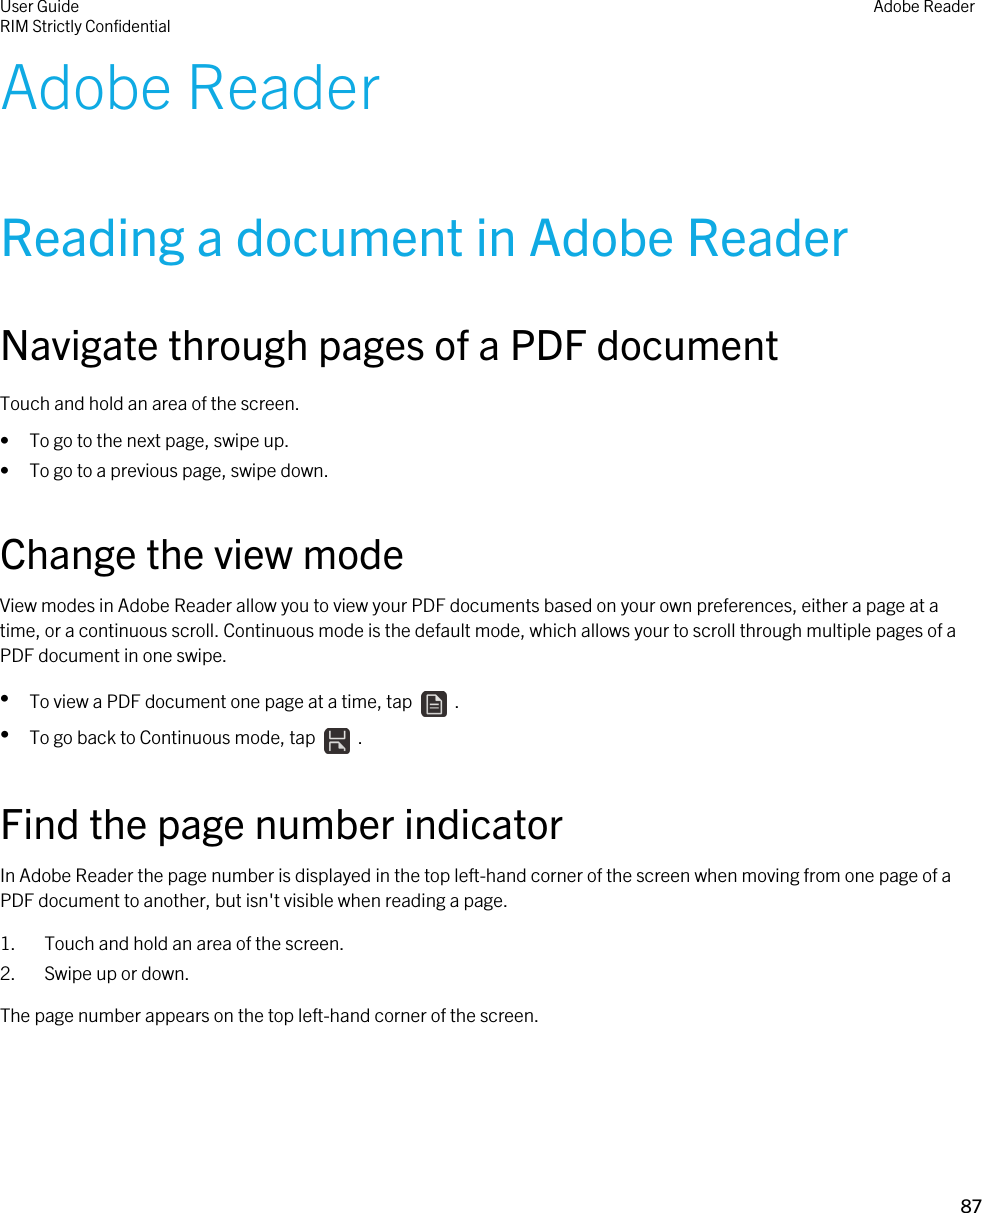 Adobe ReaderReading a document in Adobe ReaderNavigate through pages of a PDF documentTouch and hold an area of the screen.• To go to the next page, swipe up.• To go to a previous page, swipe down.Change the view modeView modes in Adobe Reader allow you to view your PDF documents based on your own preferences, either a page at a time, or a continuous scroll. Continuous mode is the default mode, which allows your to scroll through multiple pages of a PDF document in one swipe.•To view a PDF document one page at a time, tap    .•To go back to Continuous mode, tap    .Find the page number indicatorIn Adobe Reader the page number is displayed in the top left-hand corner of the screen when moving from one page of a PDF document to another, but isn&apos;t visible when reading a page.1. Touch and hold an area of the screen.2. Swipe up or down.The page number appears on the top left-hand corner of the screen.User GuideRIM Strictly Confidential Adobe Reader87 